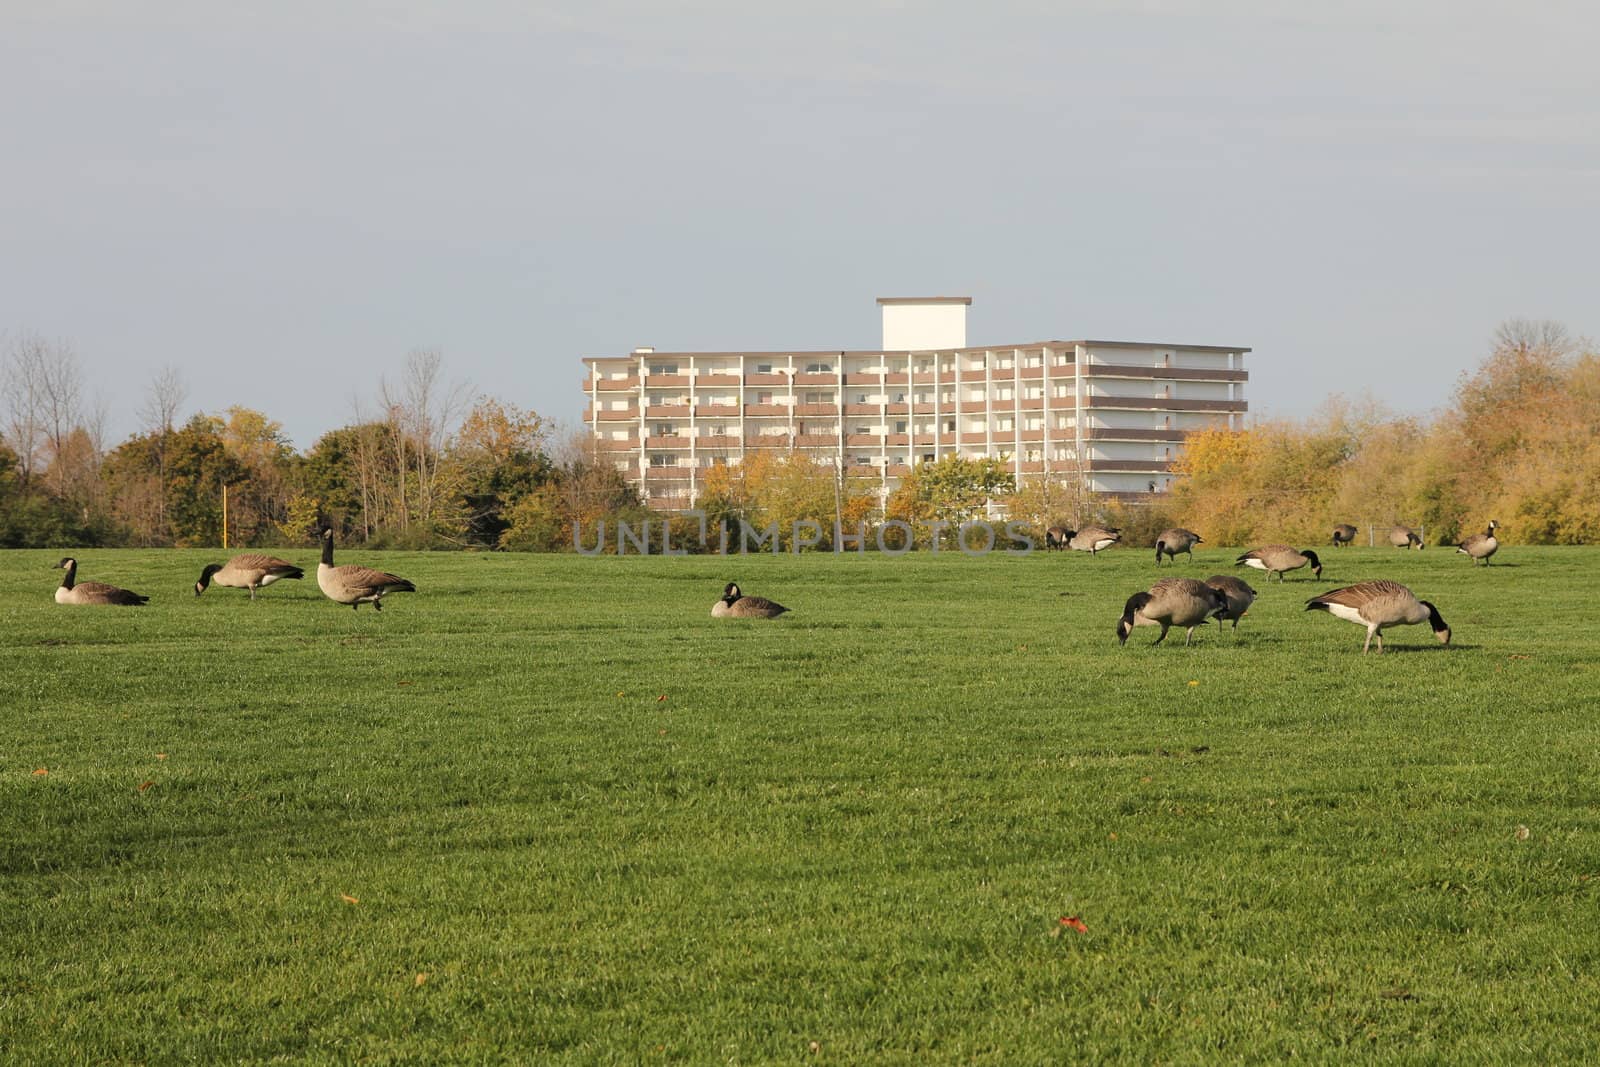 Flock of Canadian geese feeding on the grass
